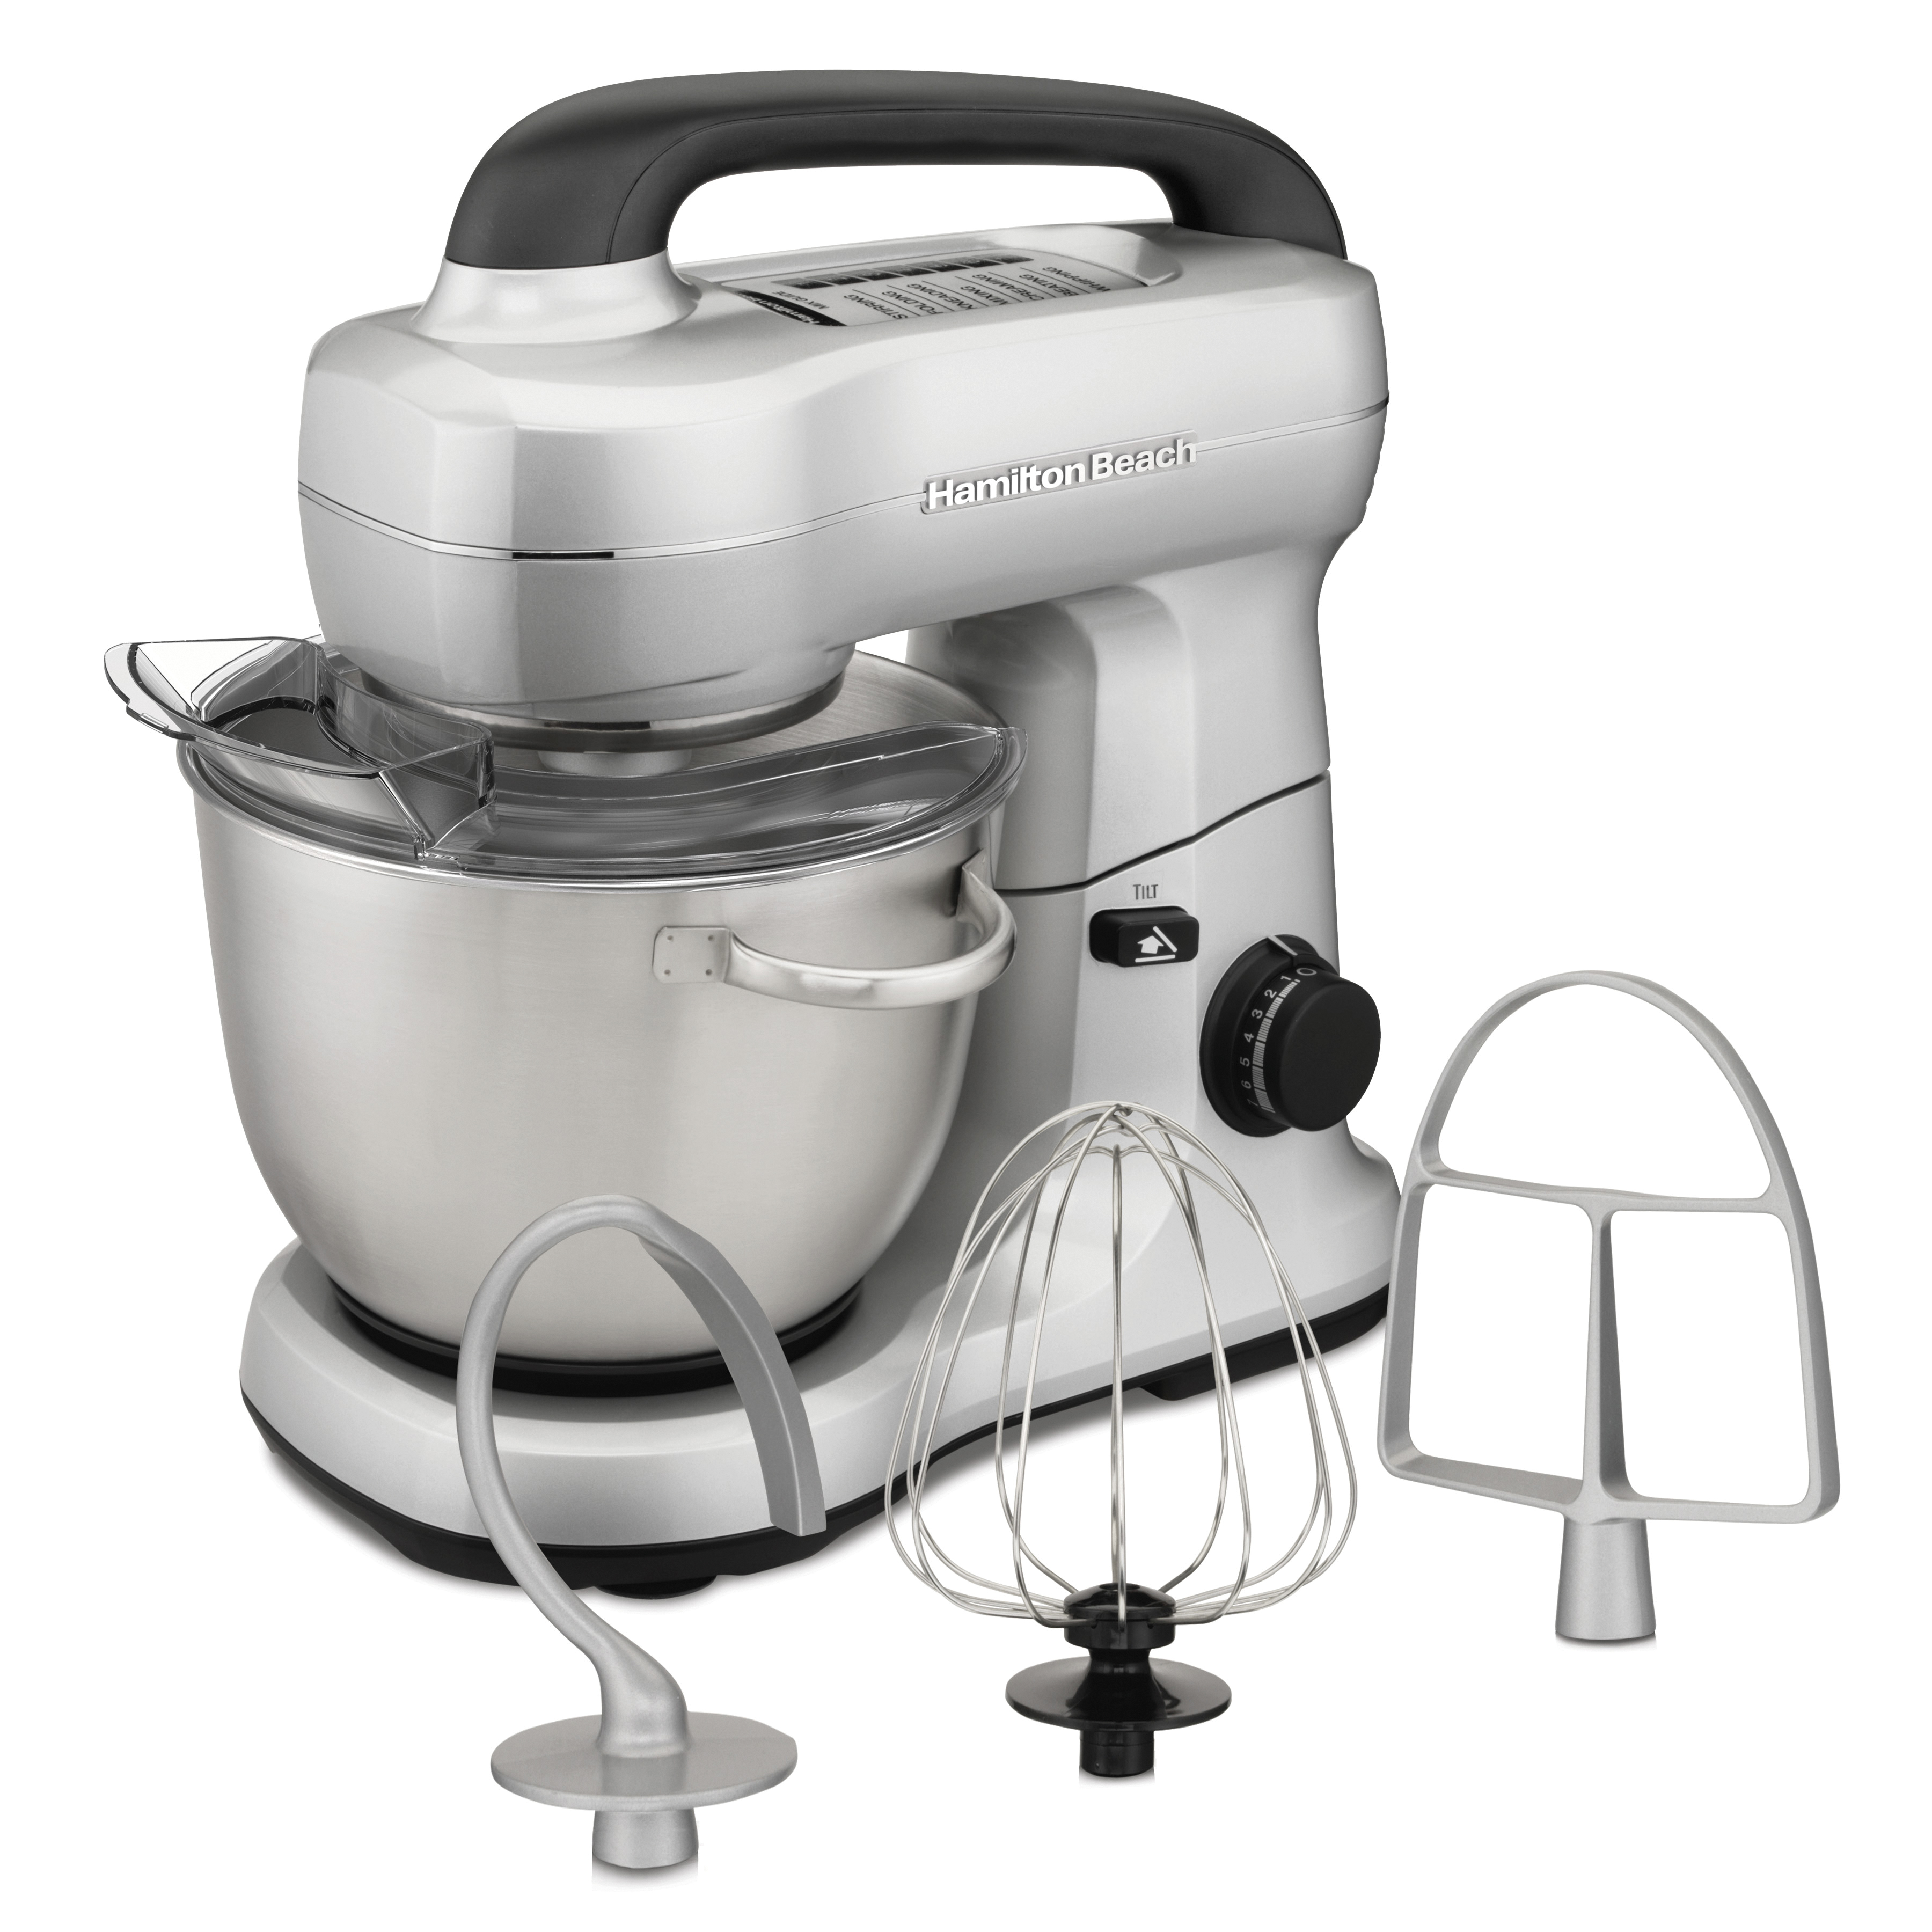 Hamilton Beach Electric Stand Mixer with 4 Quart Stainless Bowl, 7 Speeds, Whisk, Dough Hook, and Flat Beater Attachments, Splash Guard, 300 Watts, Silver, 63392 - image 1 of 9